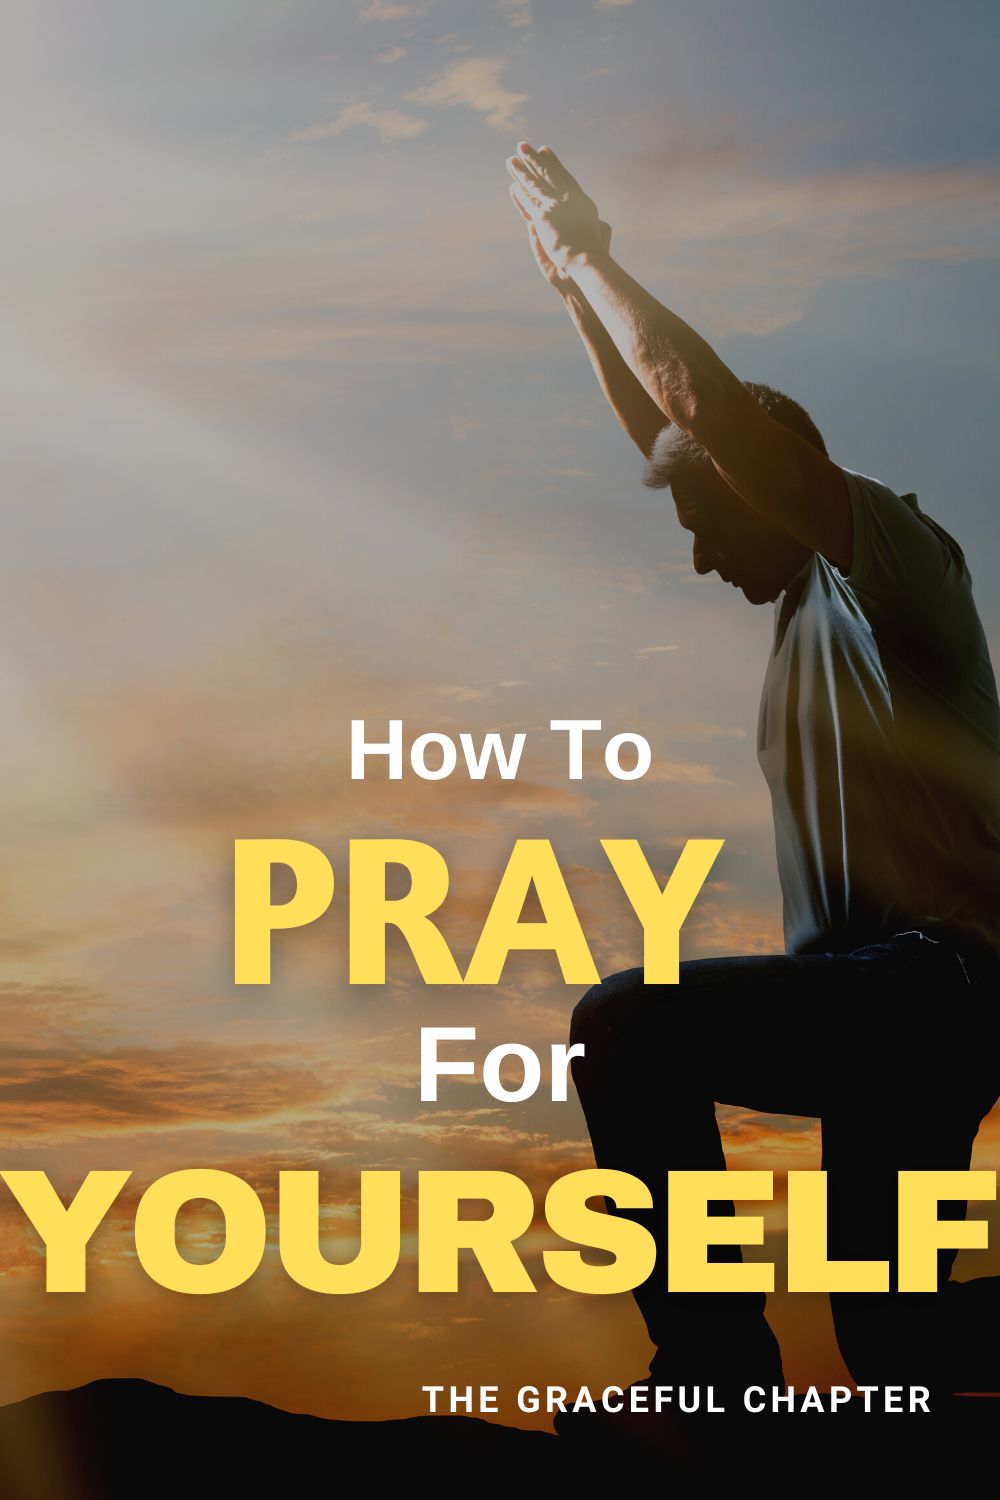 How To Pray For Yourself